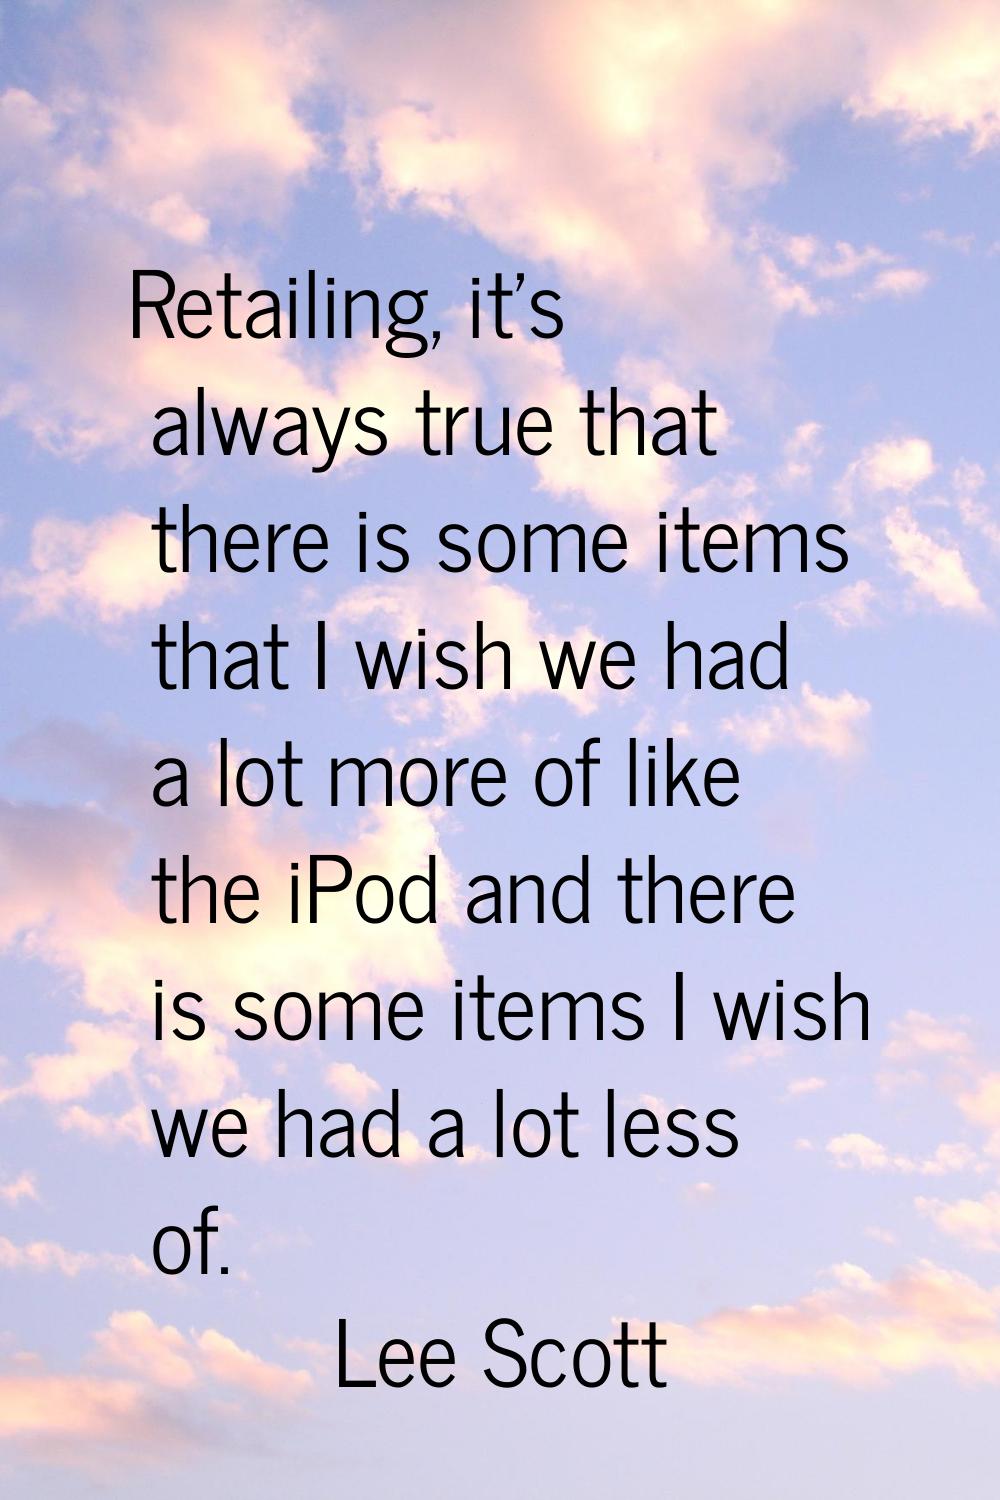 Retailing, it's always true that there is some items that I wish we had a lot more of like the iPod